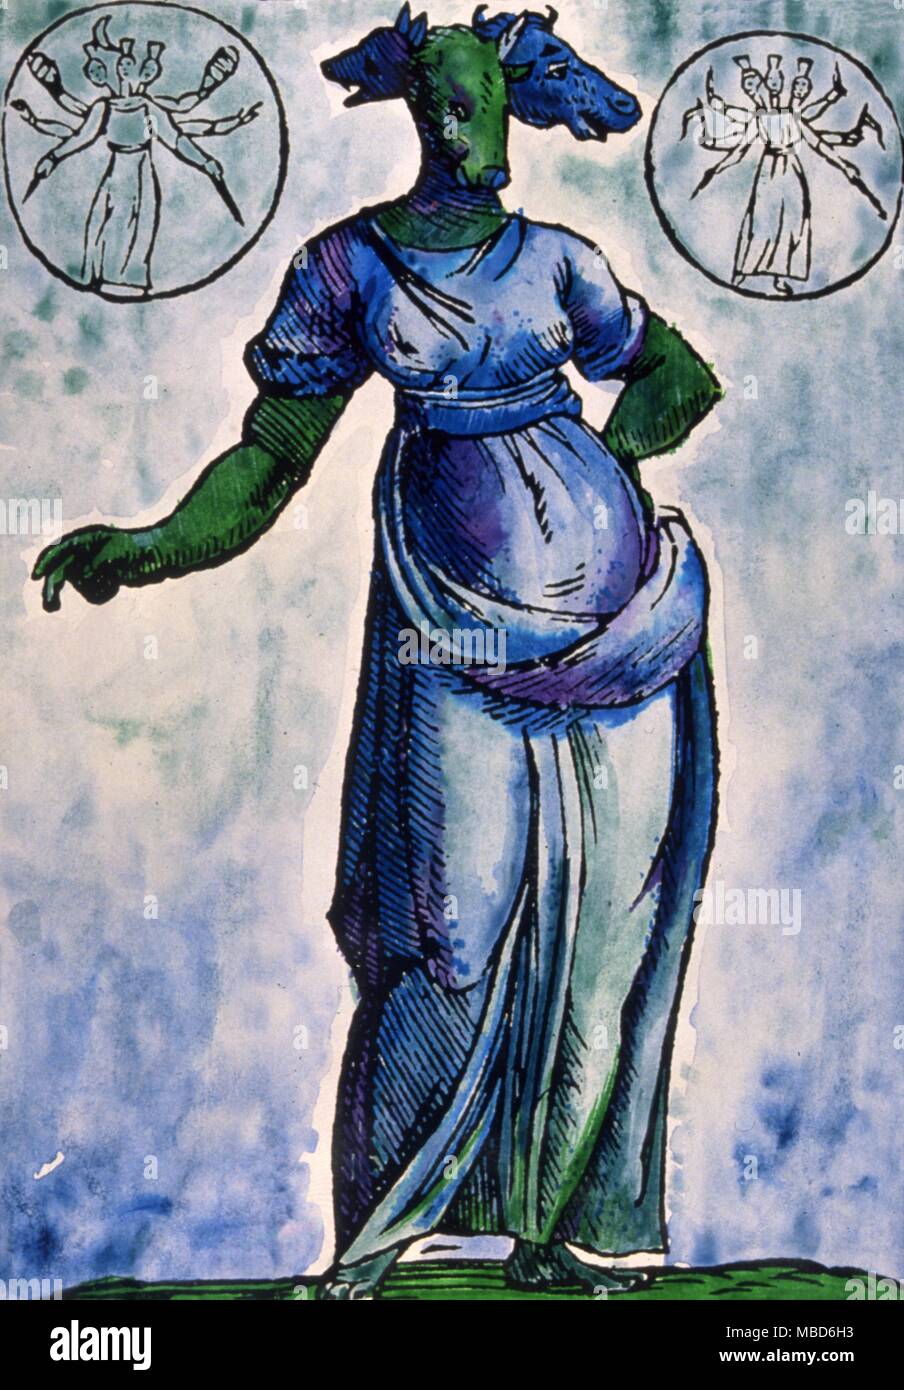 The Three Headed Demonic Goddess Of Witchcraft Hecate Ruler Of The Moon From Catari S Mythologia Greek Mythology Hecate The Three Headed Goddess Who Under A Variety Of Names Appears To Have Been The Goddess